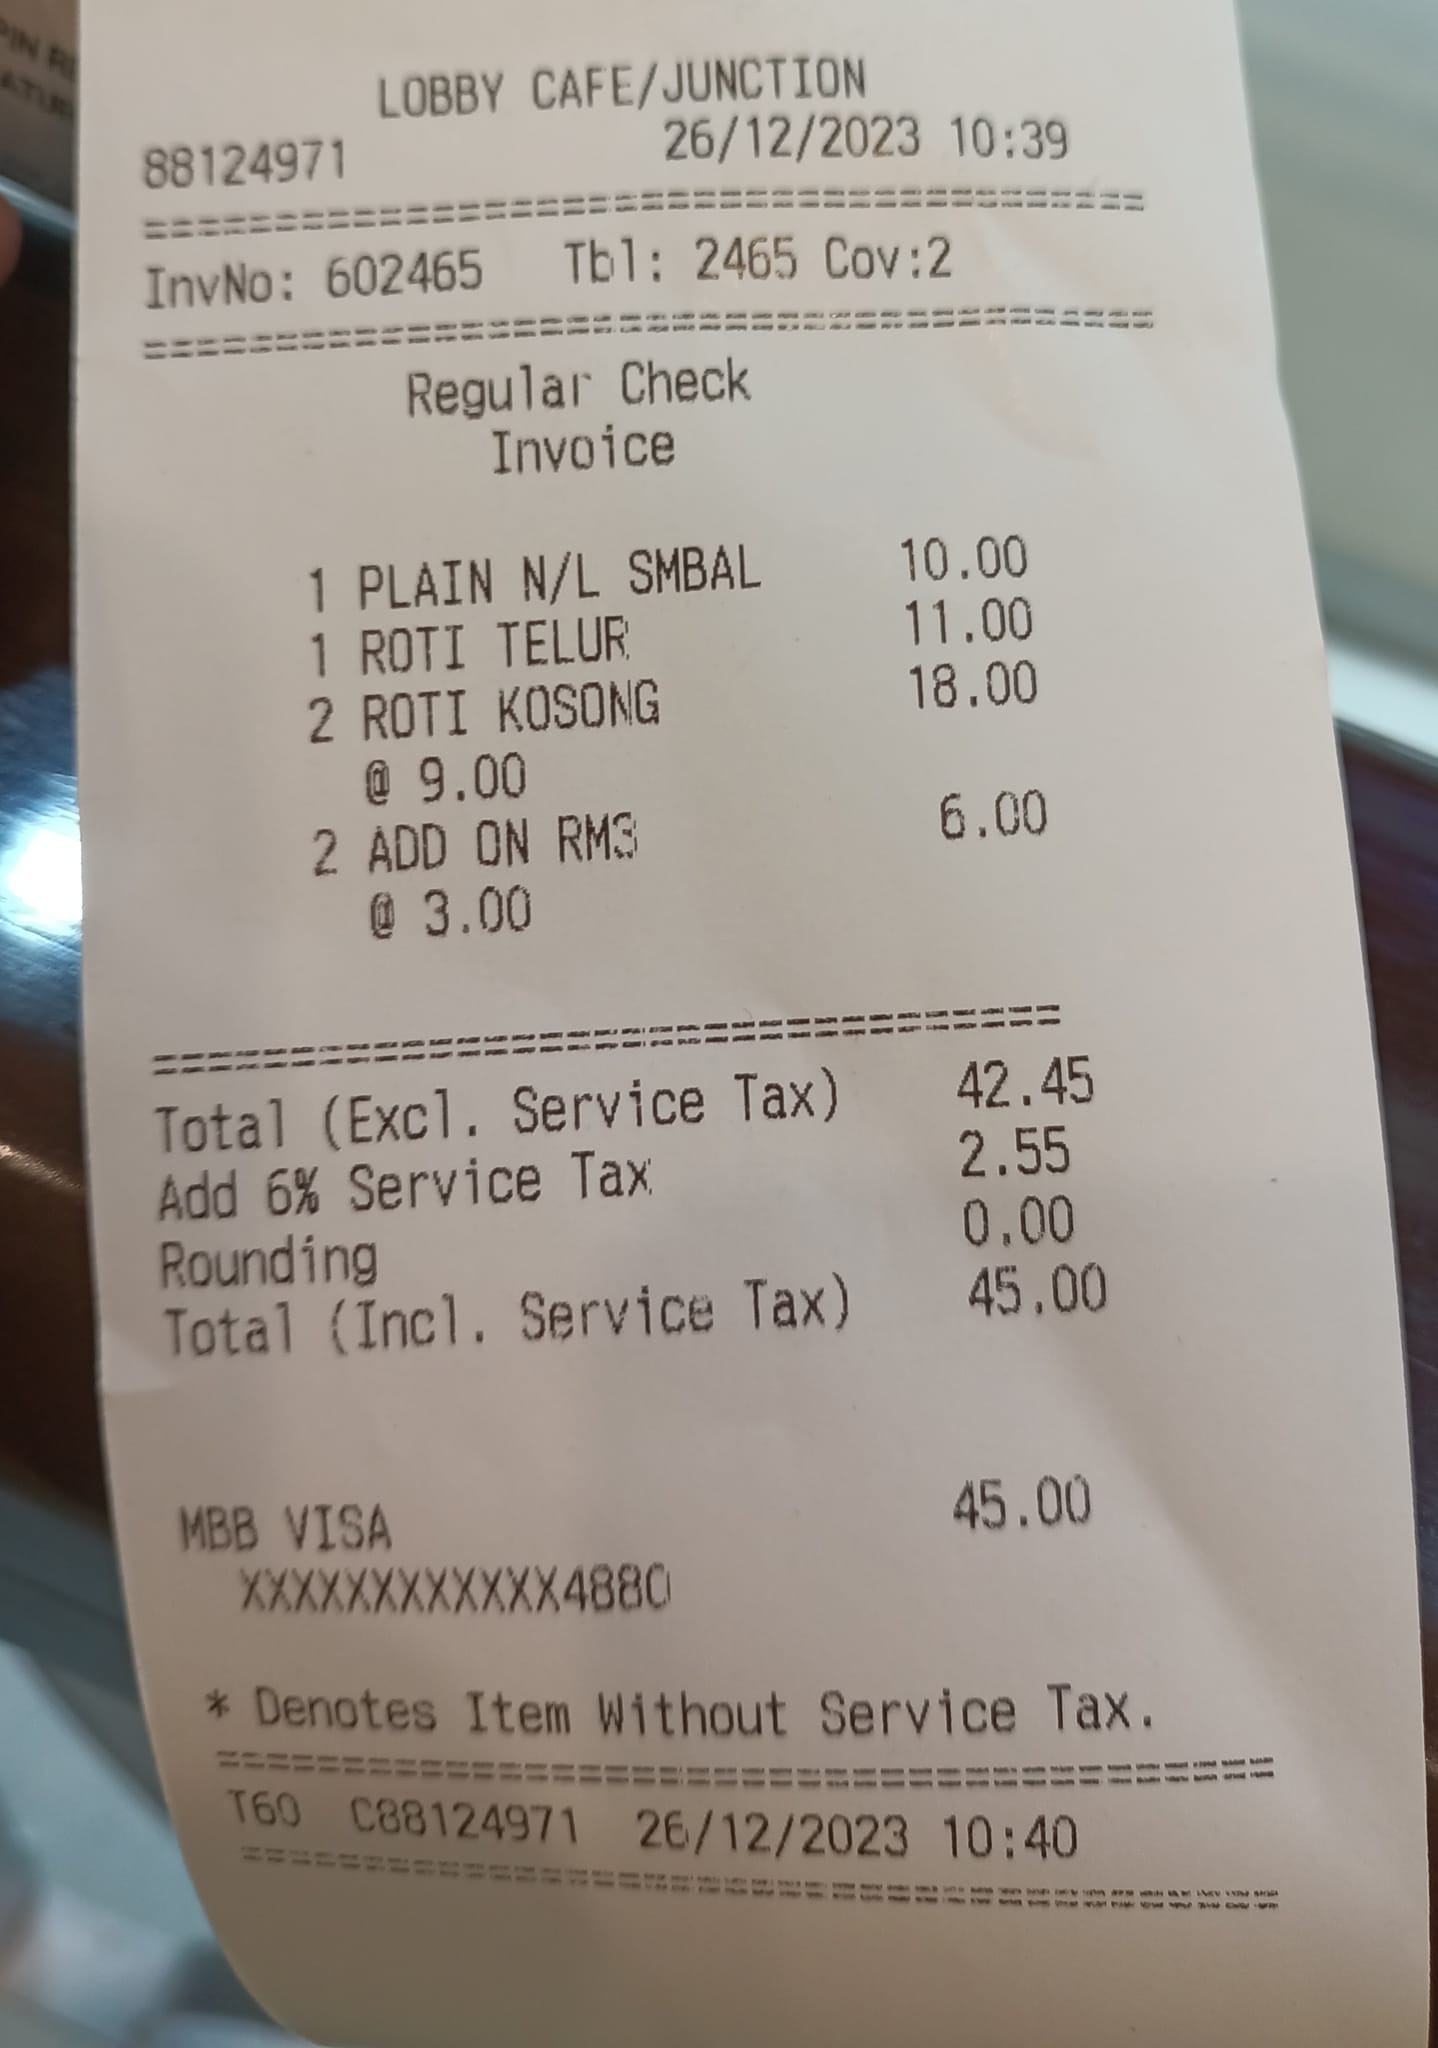 Receipt showing 2 pieces of roti canai being priced at rm18